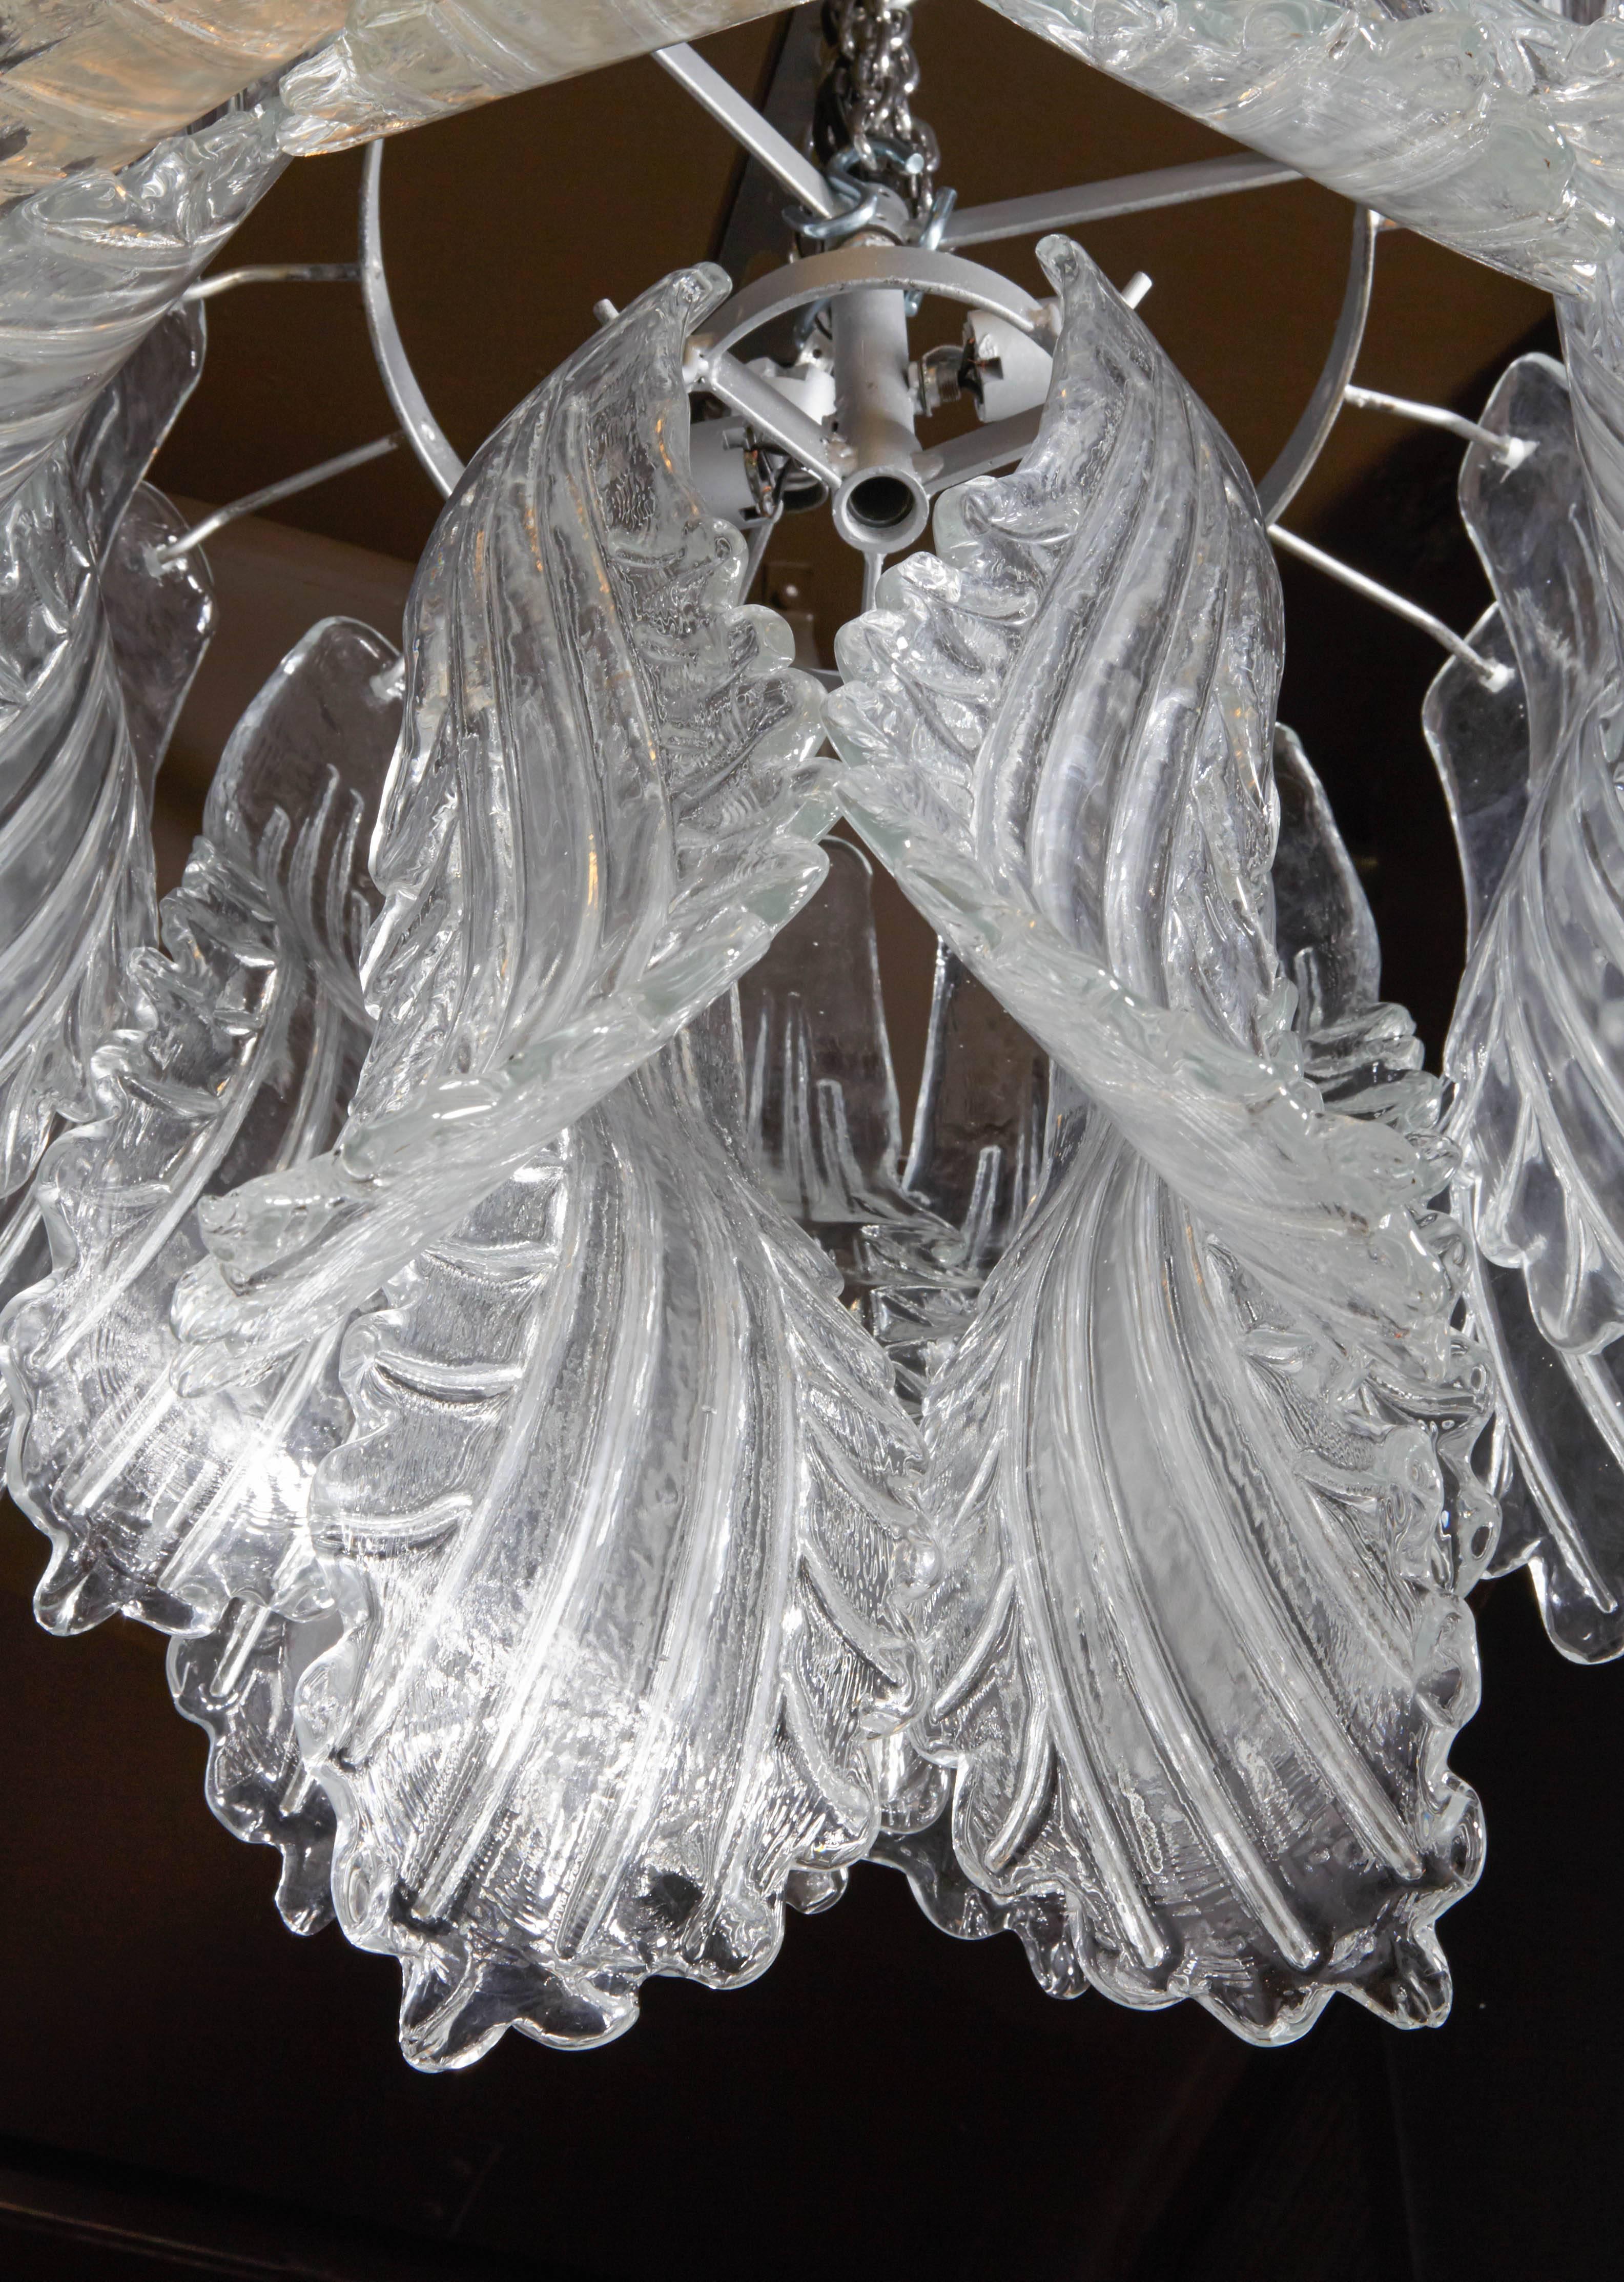 Italian Exquisite Chandelier with Stylized Murano Glass Leaves by Barovier & Toso